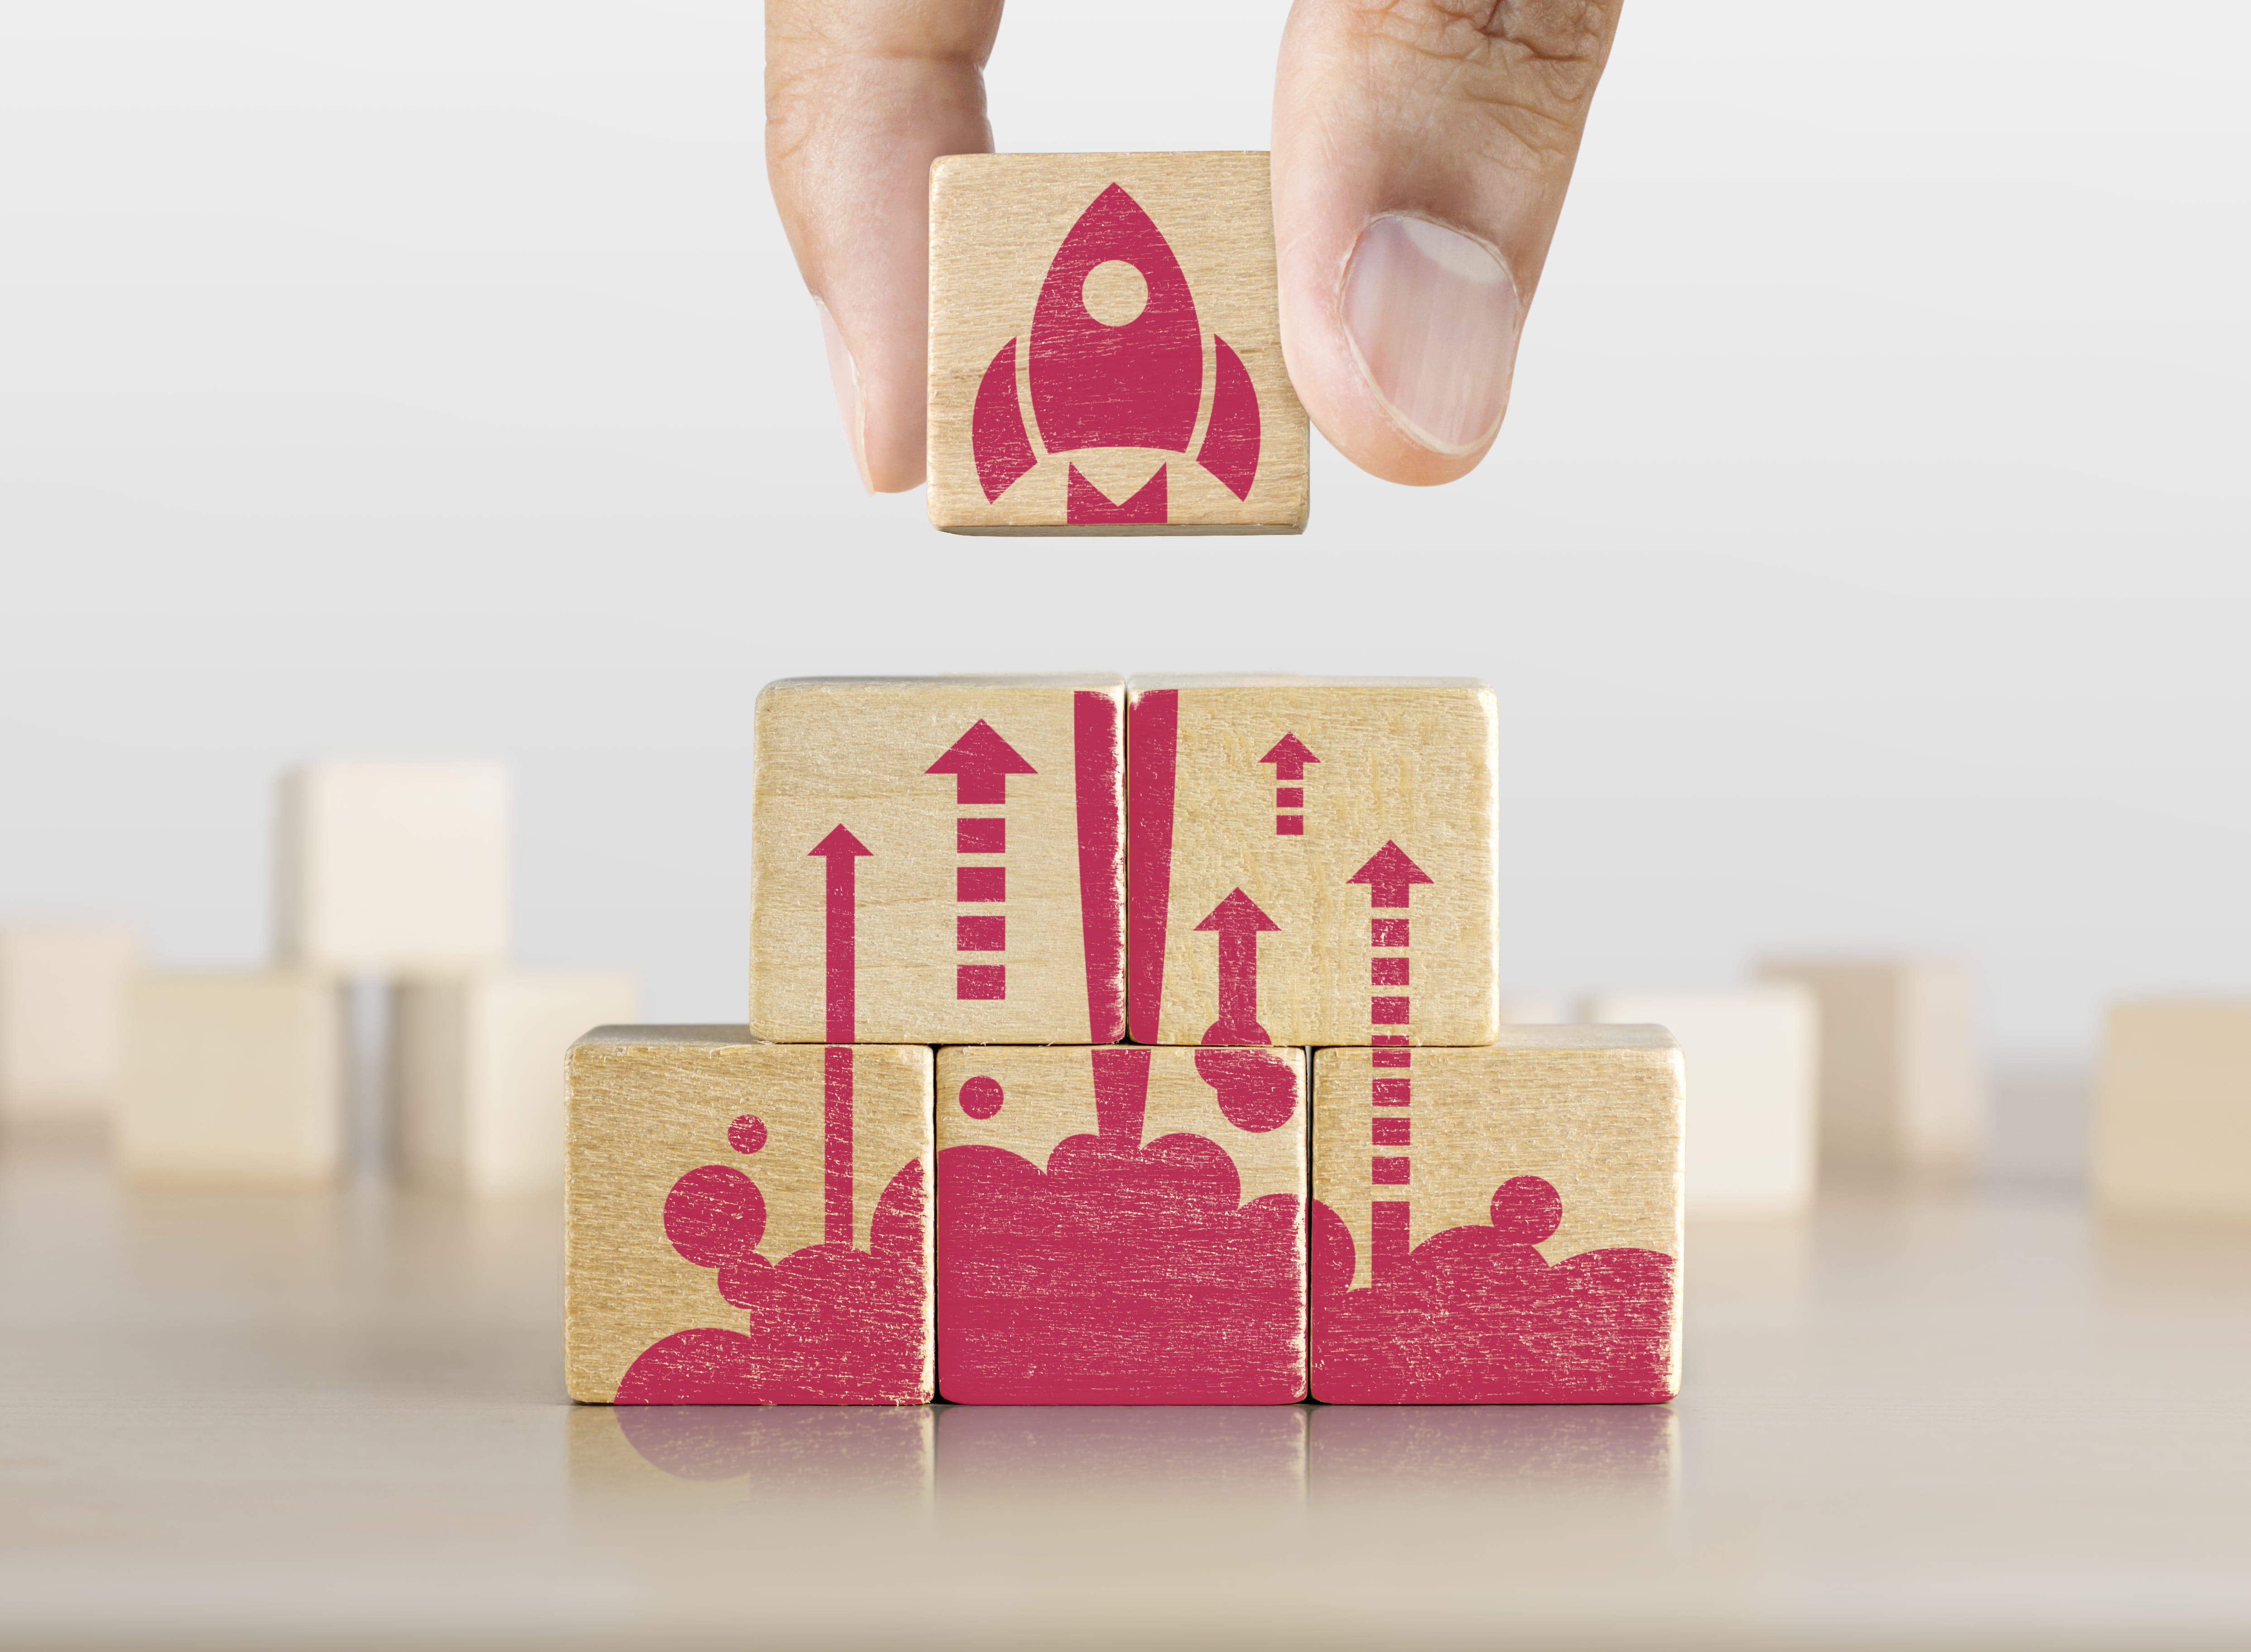 Wooden blocks stacked on a table. Painted on the blocks is an image of a rocket ship blasting off. A hand can be seen stacking the last block on top.